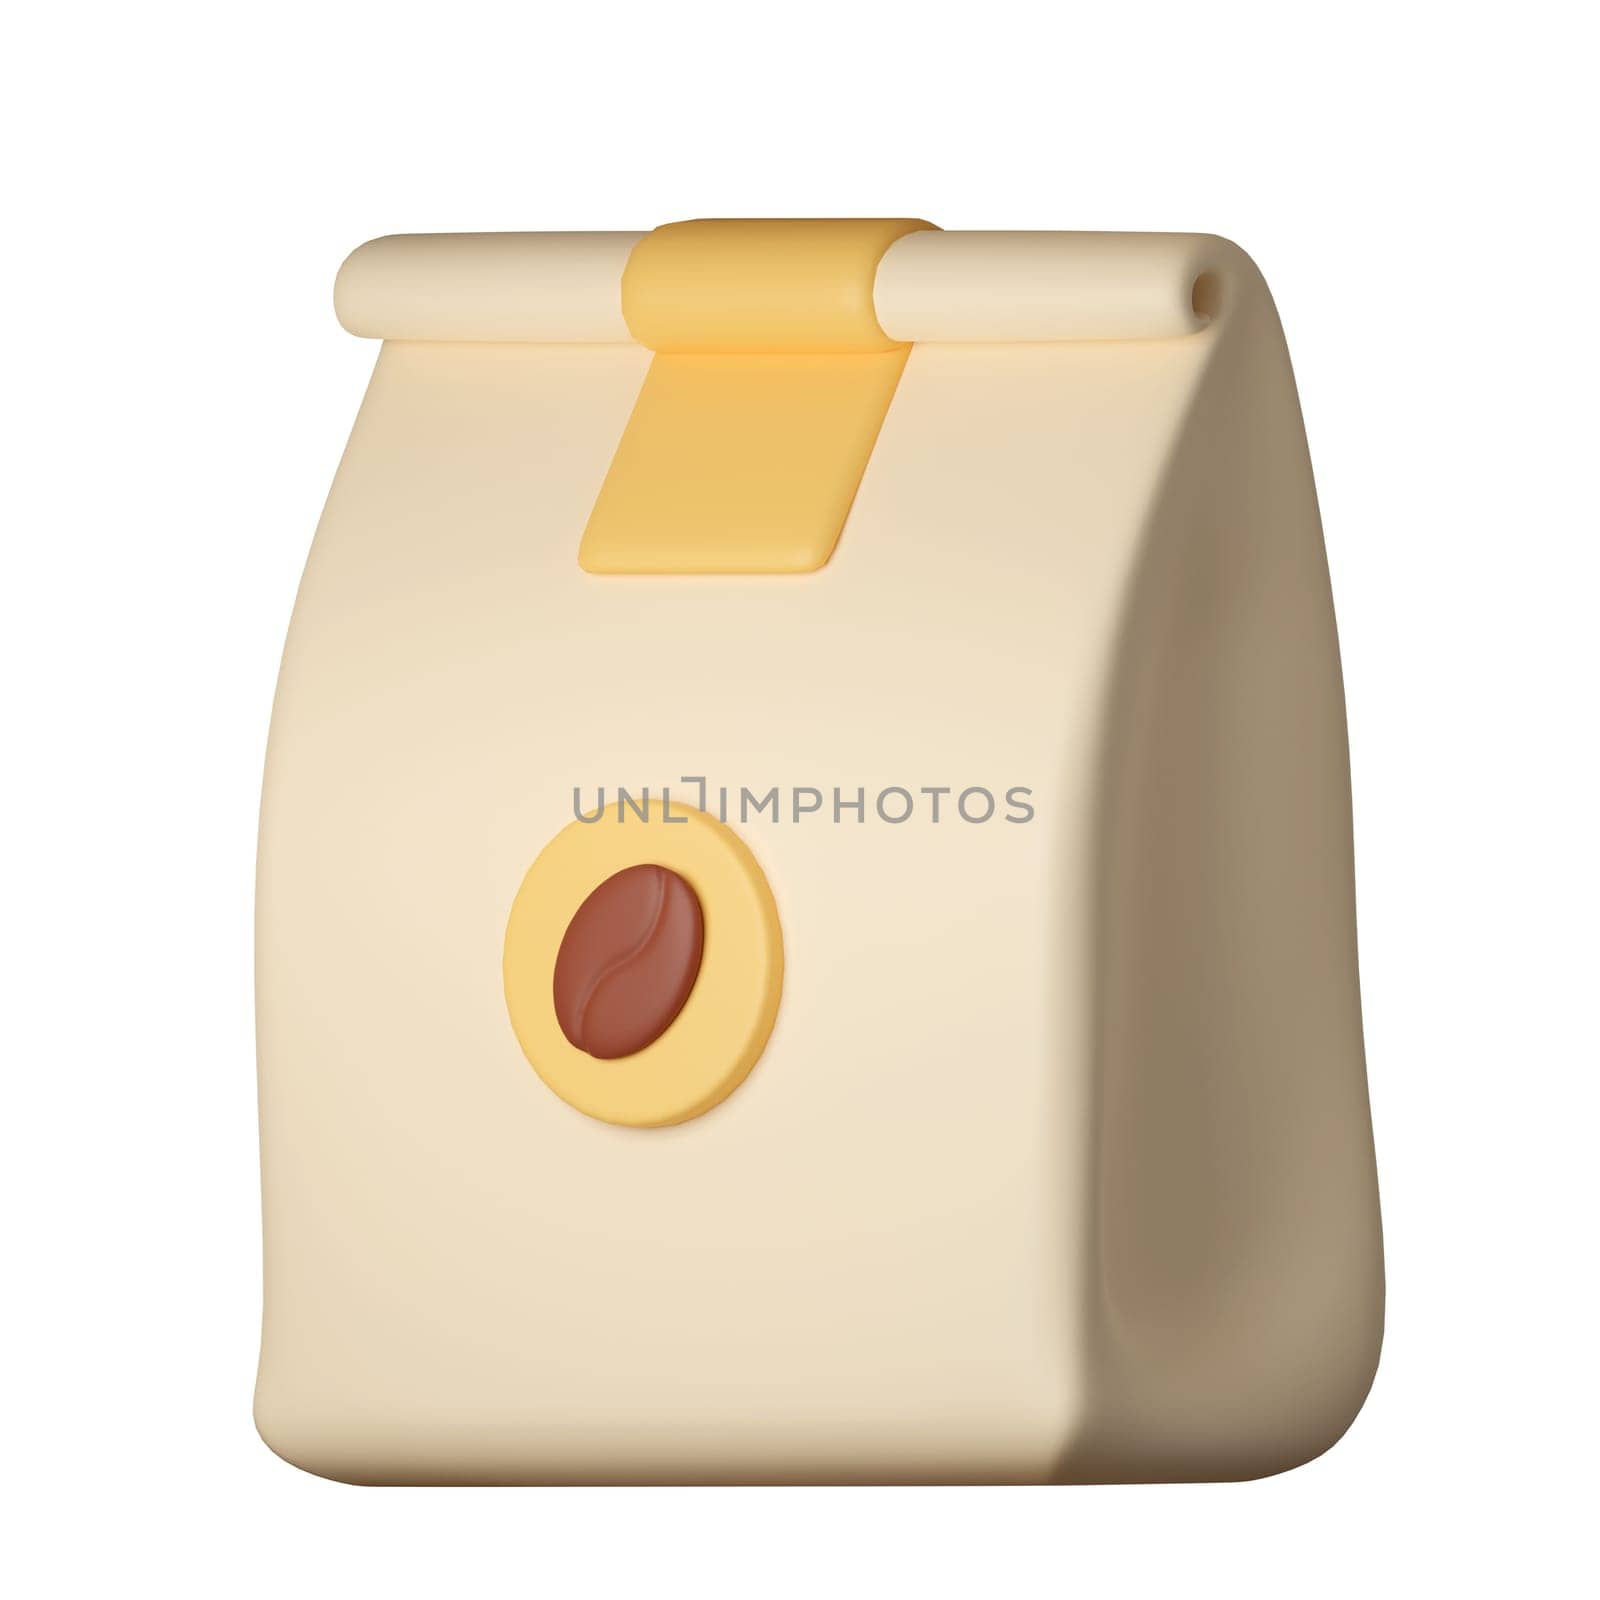 Coffee bean bag Cartoon Style Isolated on a White Background. 3d illustration.